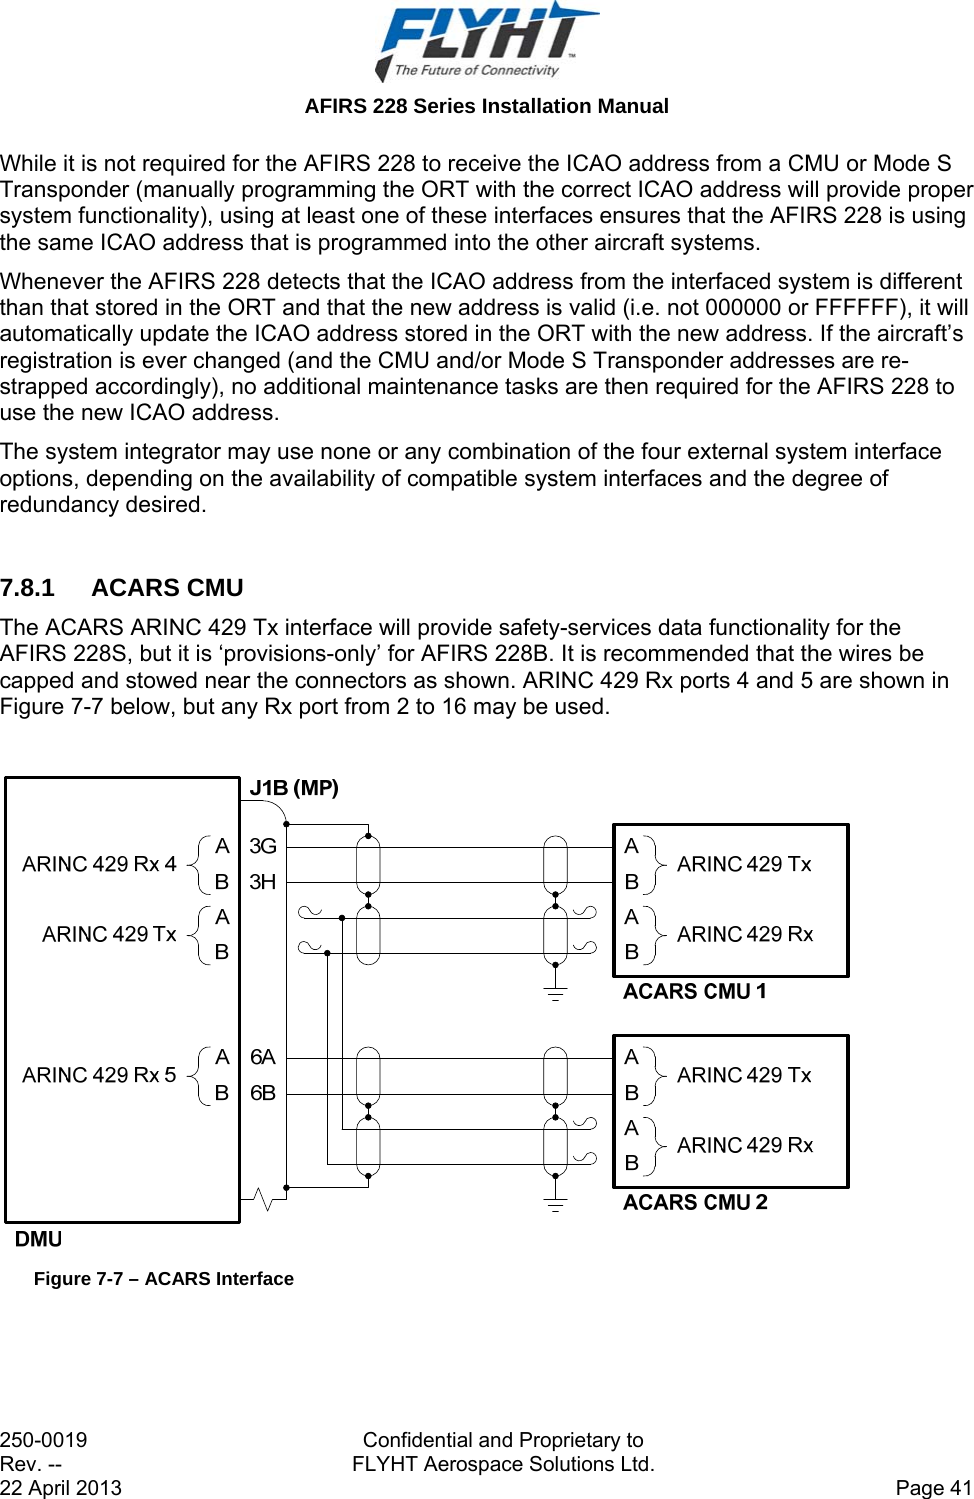  AFIRS 228 Series Installation Manual 250-0019  Confidential and Proprietary to Rev. --  FLYHT Aerospace Solutions Ltd. 22 April 2013    Page 41 While it is not required for the AFIRS 228 to receive the ICAO address from a CMU or Mode S Transponder (manually programming the ORT with the correct ICAO address will provide proper system functionality), using at least one of these interfaces ensures that the AFIRS 228 is using the same ICAO address that is programmed into the other aircraft systems. Whenever the AFIRS 228 detects that the ICAO address from the interfaced system is different than that stored in the ORT and that the new address is valid (i.e. not 000000 or FFFFFF), it will automatically update the ICAO address stored in the ORT with the new address. If the aircraft’s registration is ever changed (and the CMU and/or Mode S Transponder addresses are re-strapped accordingly), no additional maintenance tasks are then required for the AFIRS 228 to use the new ICAO address. The system integrator may use none or any combination of the four external system interface options, depending on the availability of compatible system interfaces and the degree of redundancy desired.  7.8.1 ACARS CMU The ACARS ARINC 429 Tx interface will provide safety-services data functionality for the AFIRS 228S, but it is ‘provisions-only’ for AFIRS 228B. It is recommended that the wires be capped and stowed near the connectors as shown. ARINC 429 Rx ports 4 and 5 are shown in Figure 7-7 below, but any Rx port from 2 to 16 may be used.   Figure 7-7 – ACARS Interface  